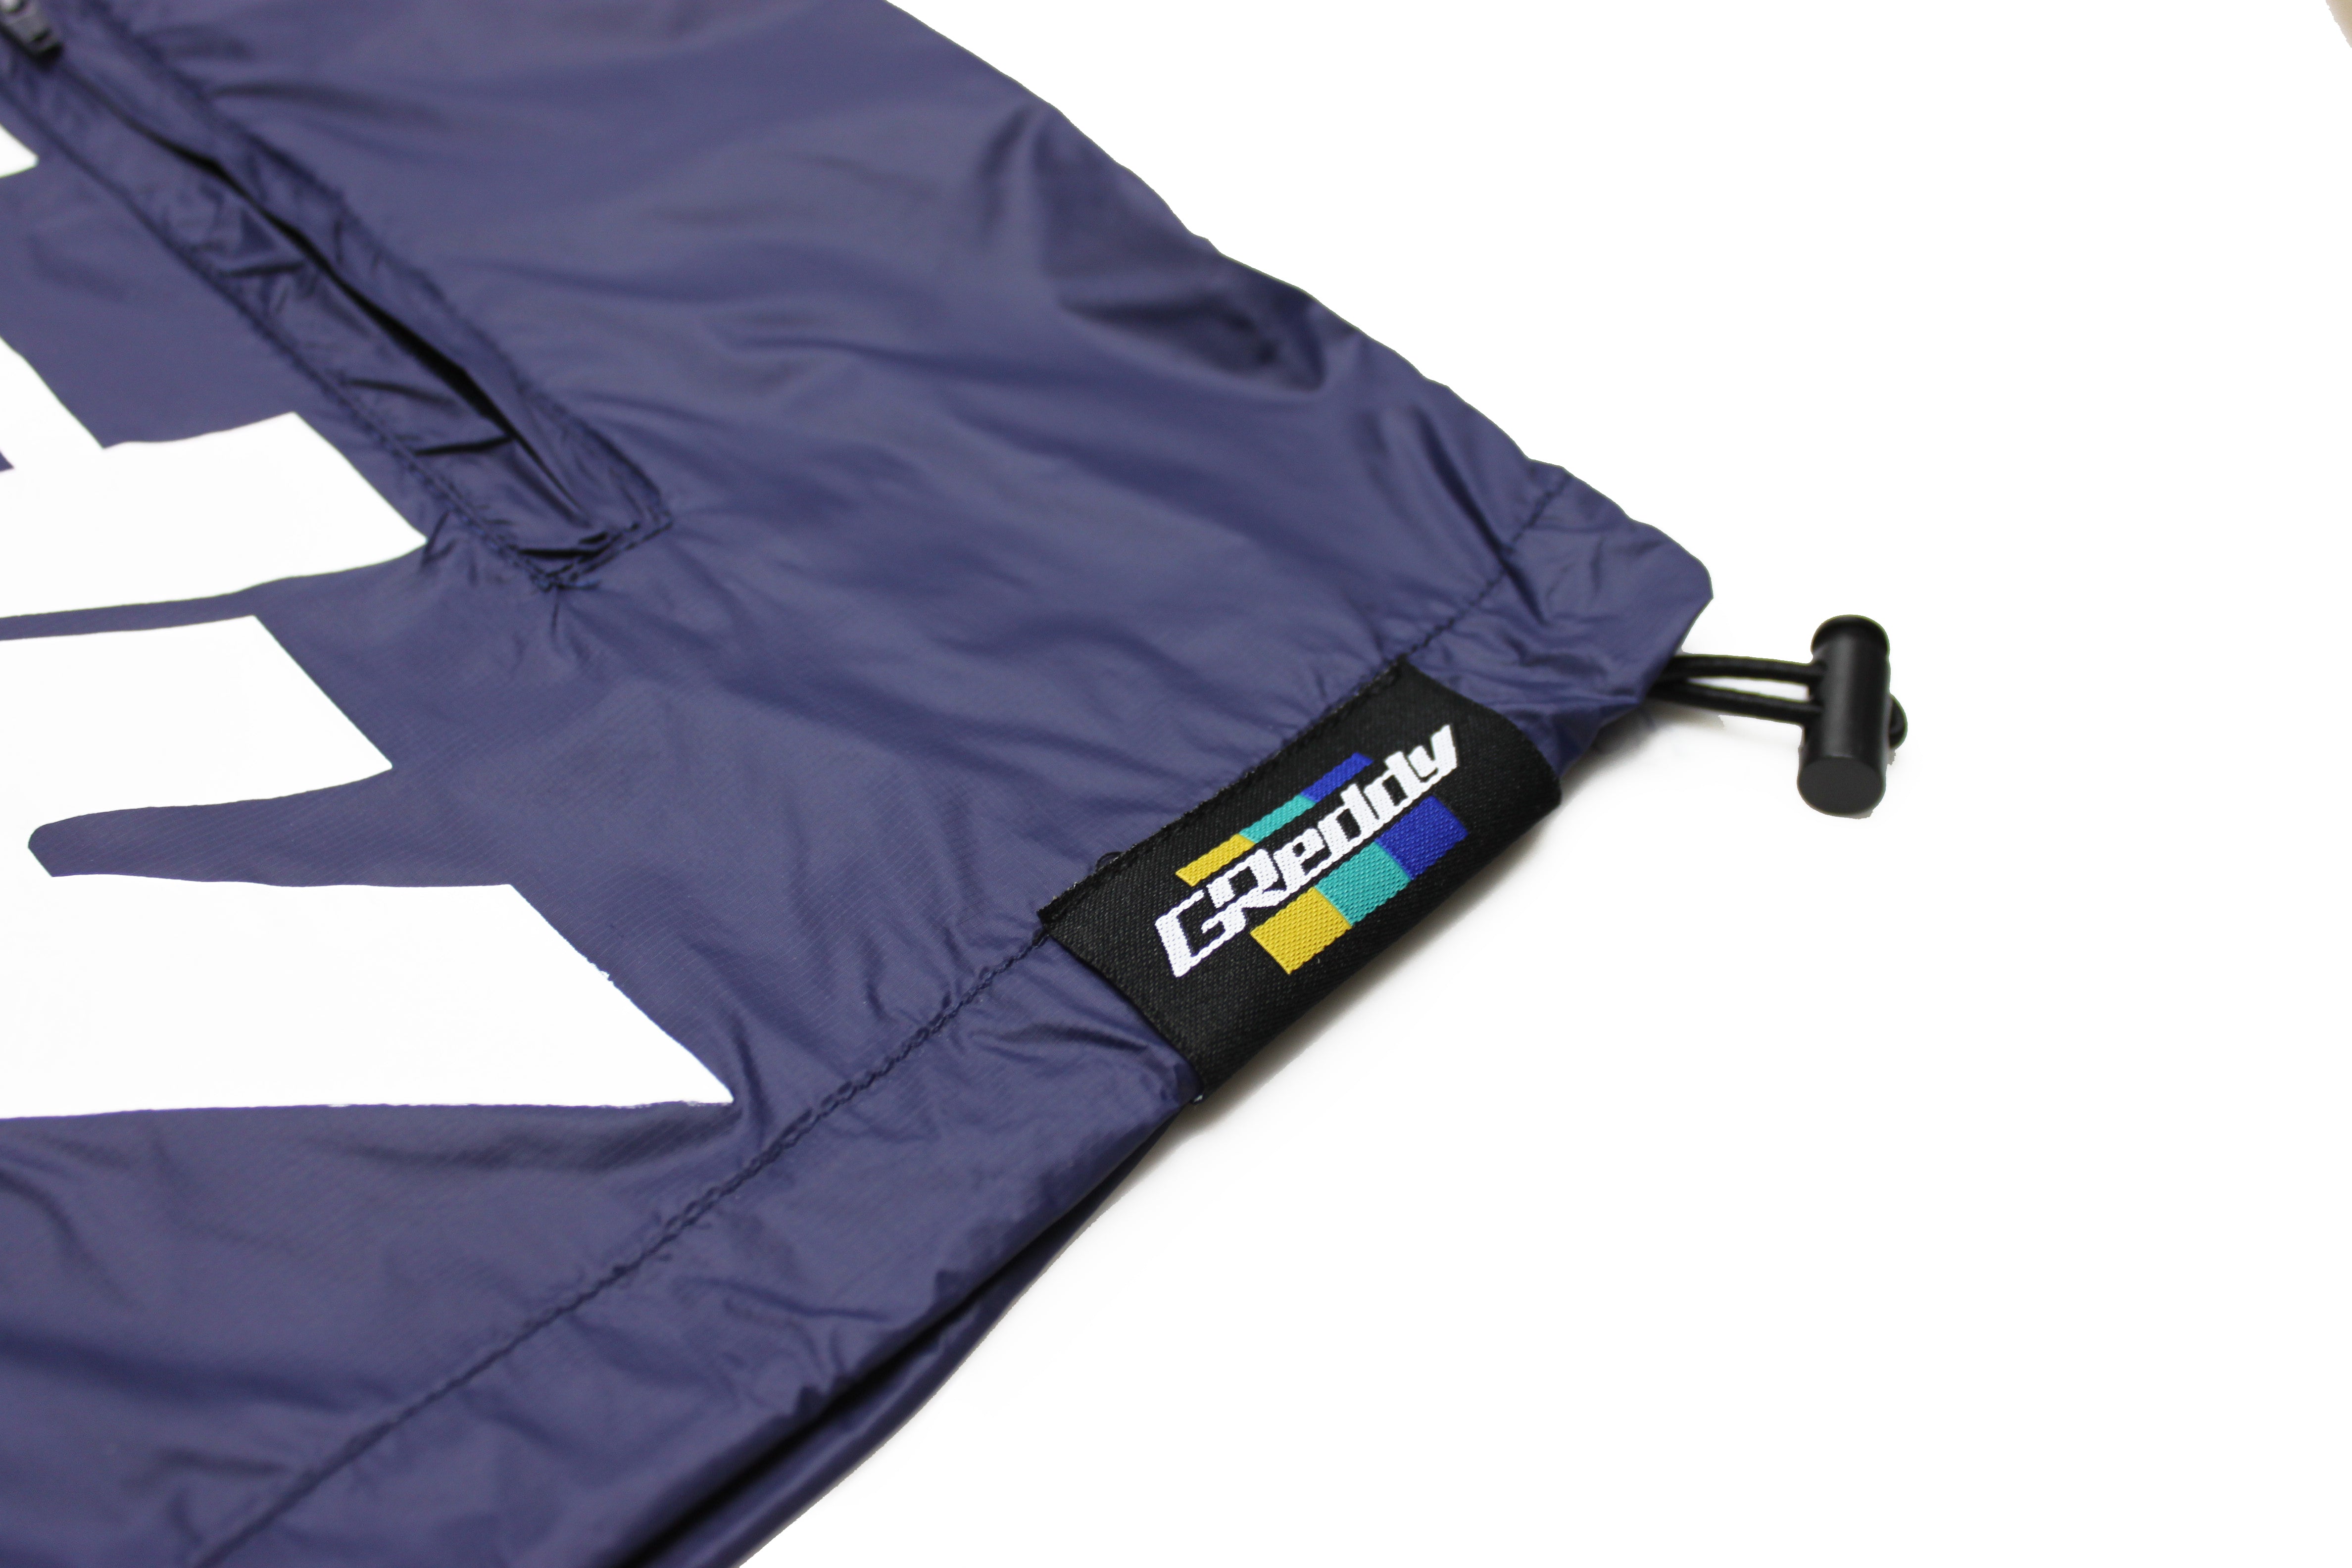 GReddy Extra Light-weight Pack-able Travel Nylon  Jacket - Tri-color